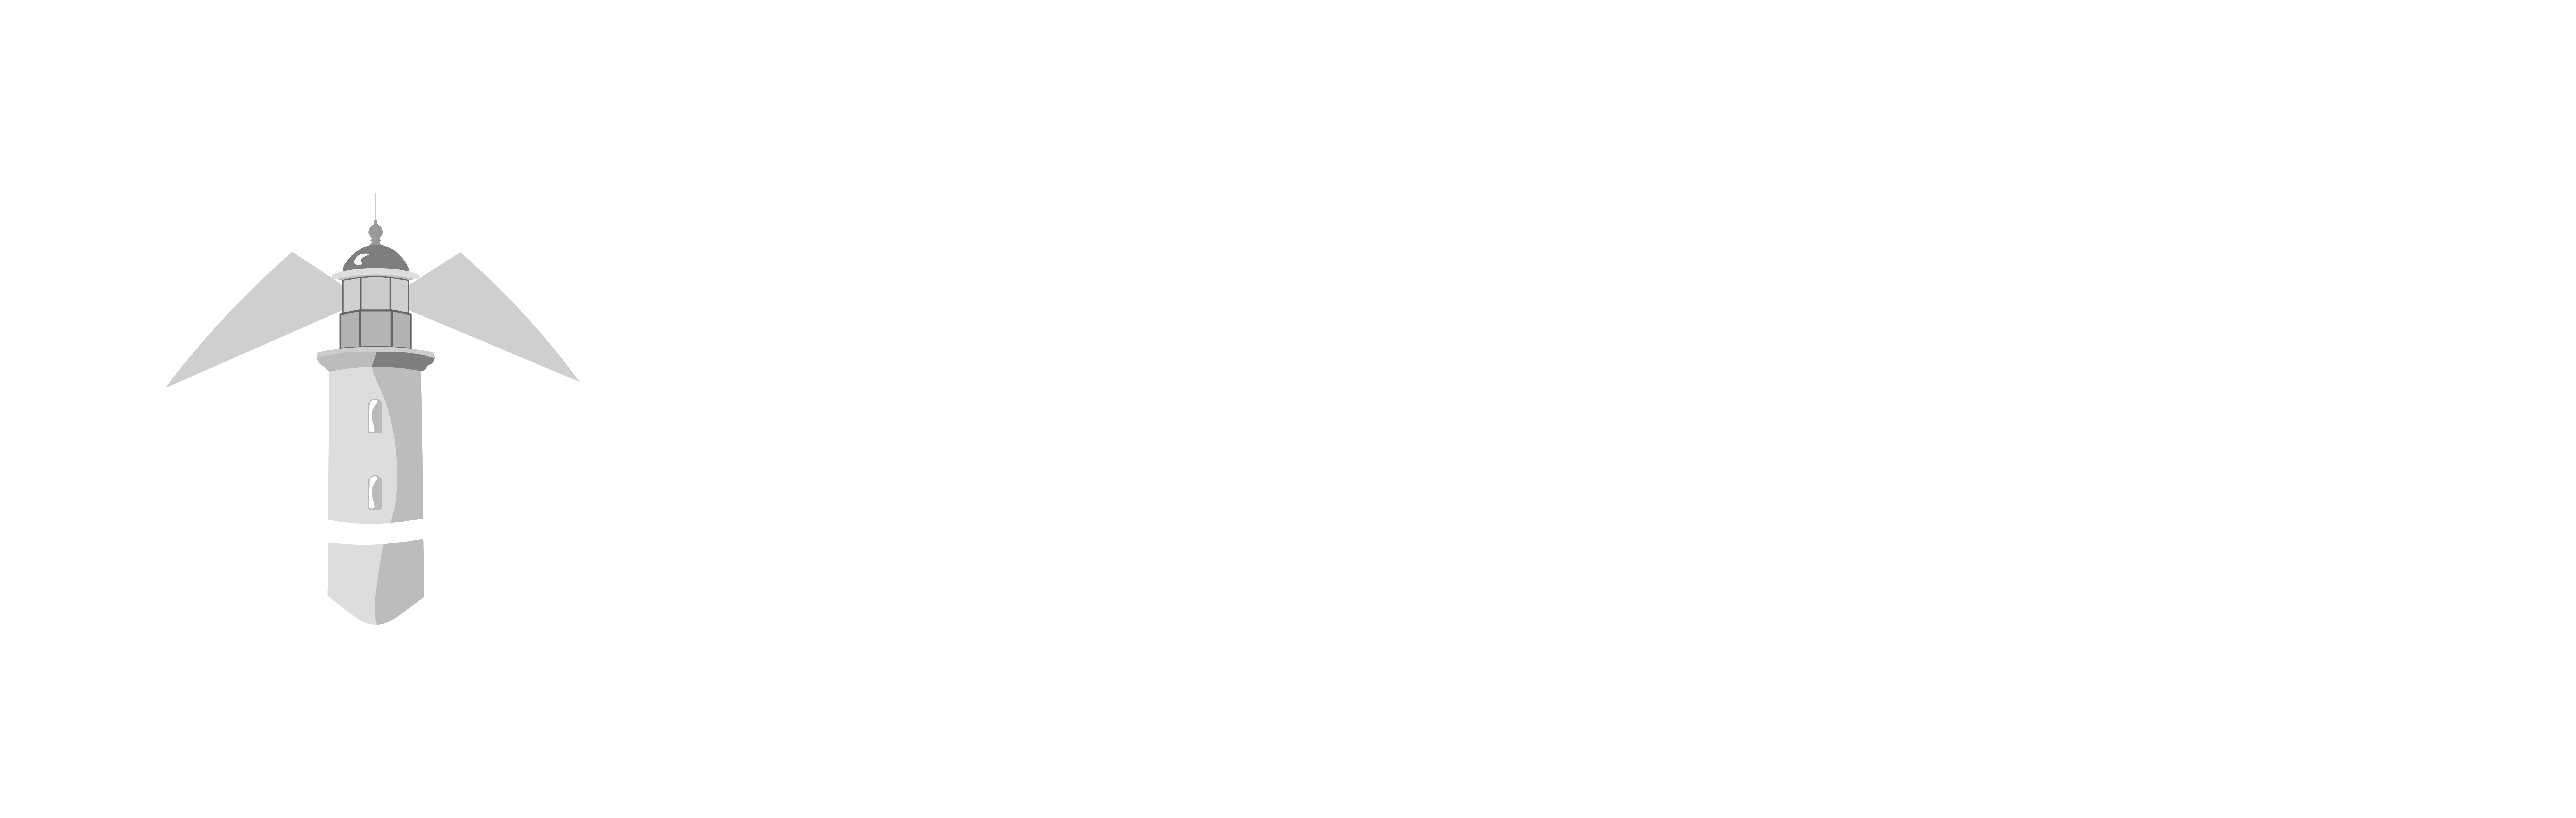 IEEE Student Branch University of Peloponnese at Patras